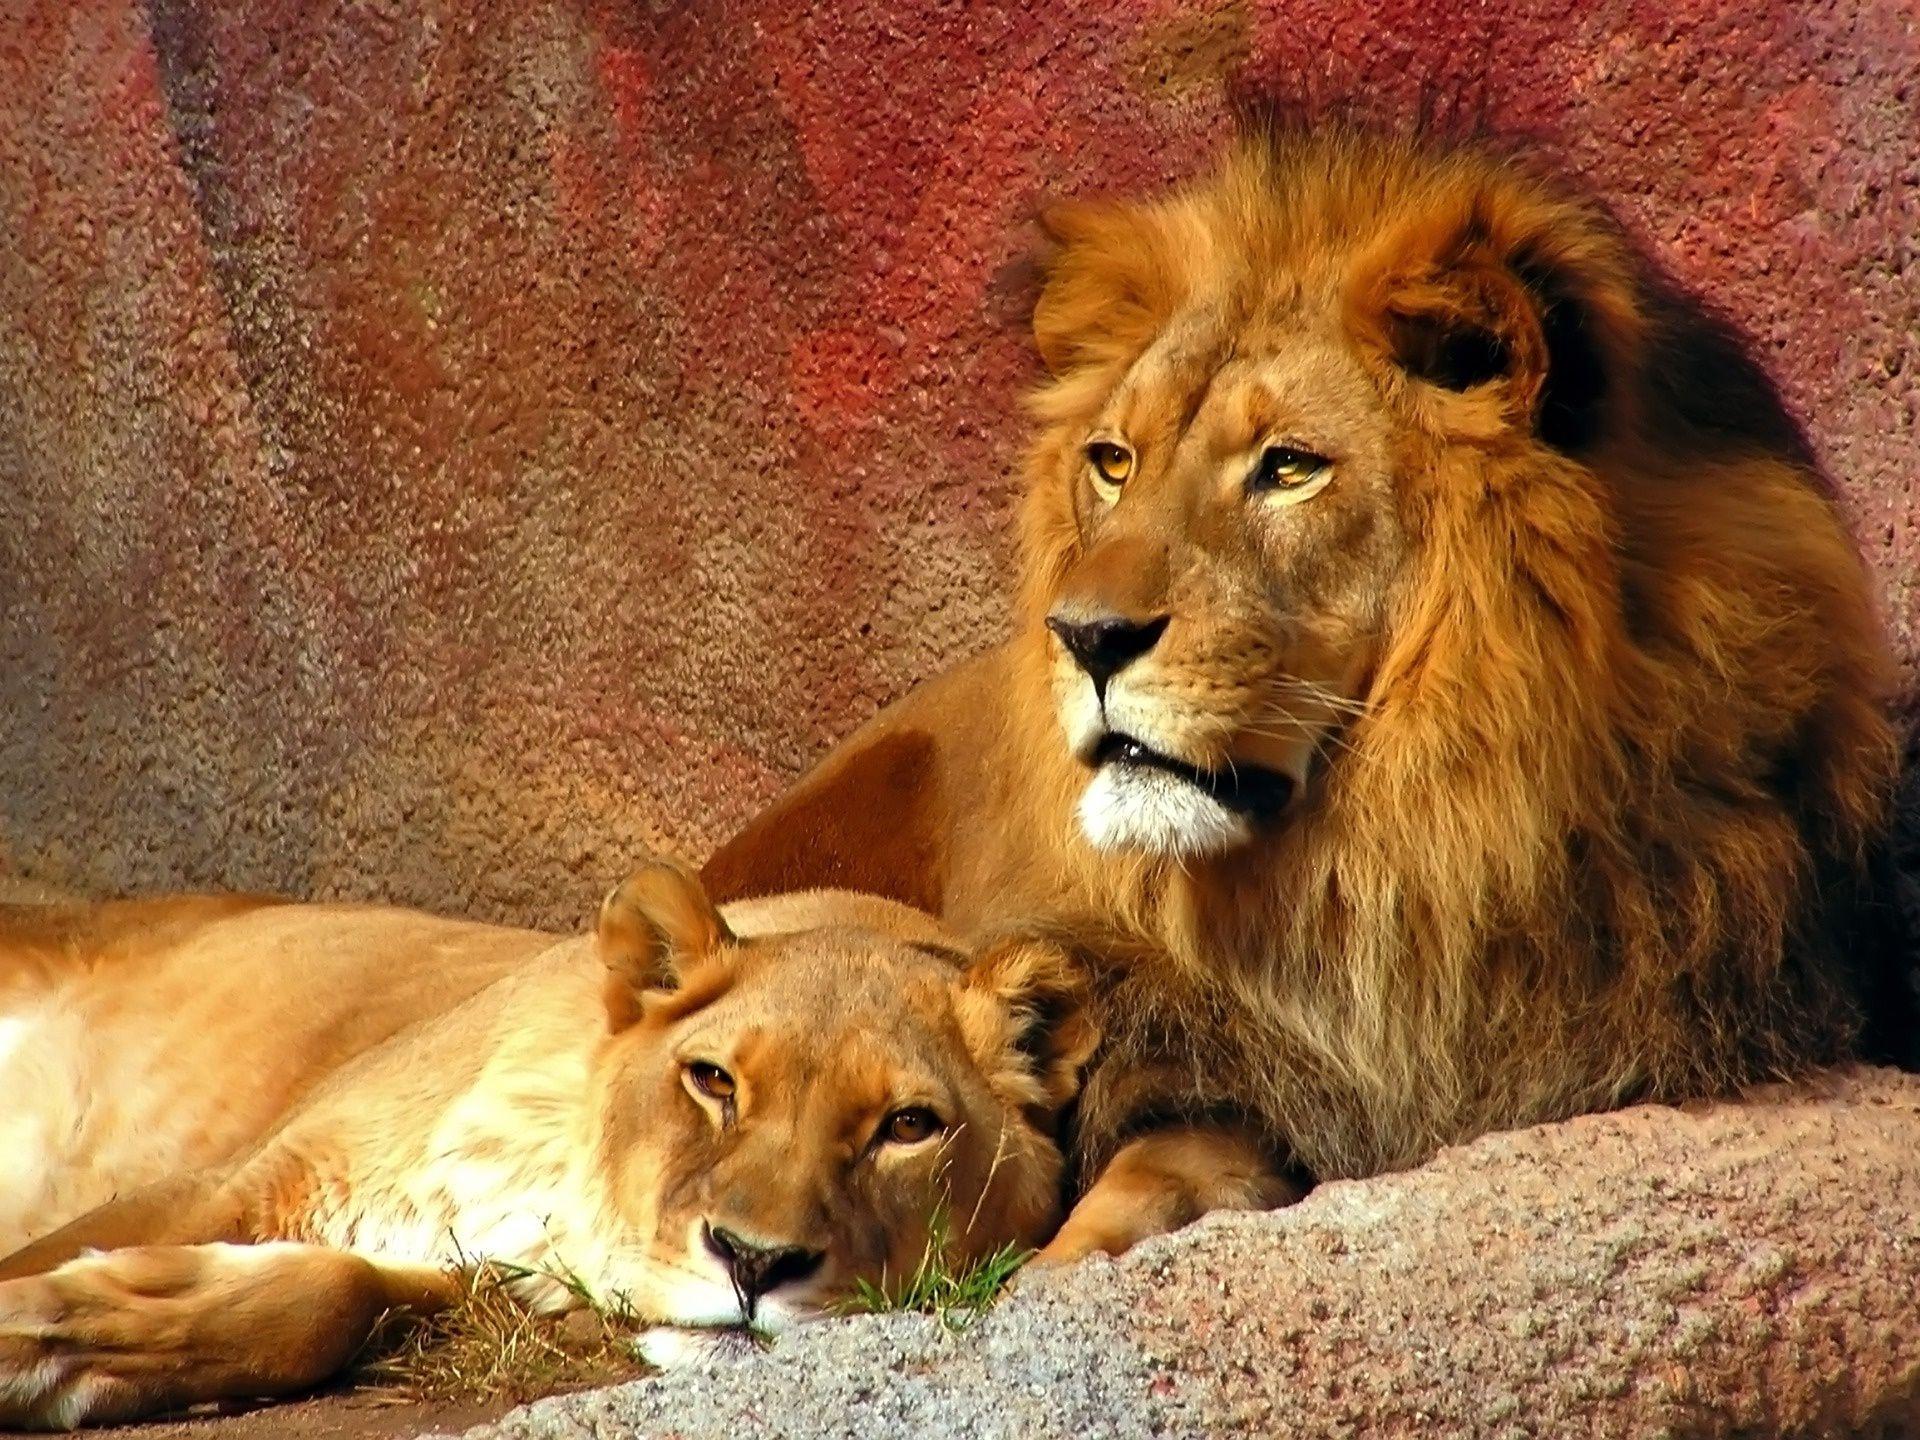 Resting Lion & Lioness Wallpaper and Photo Download